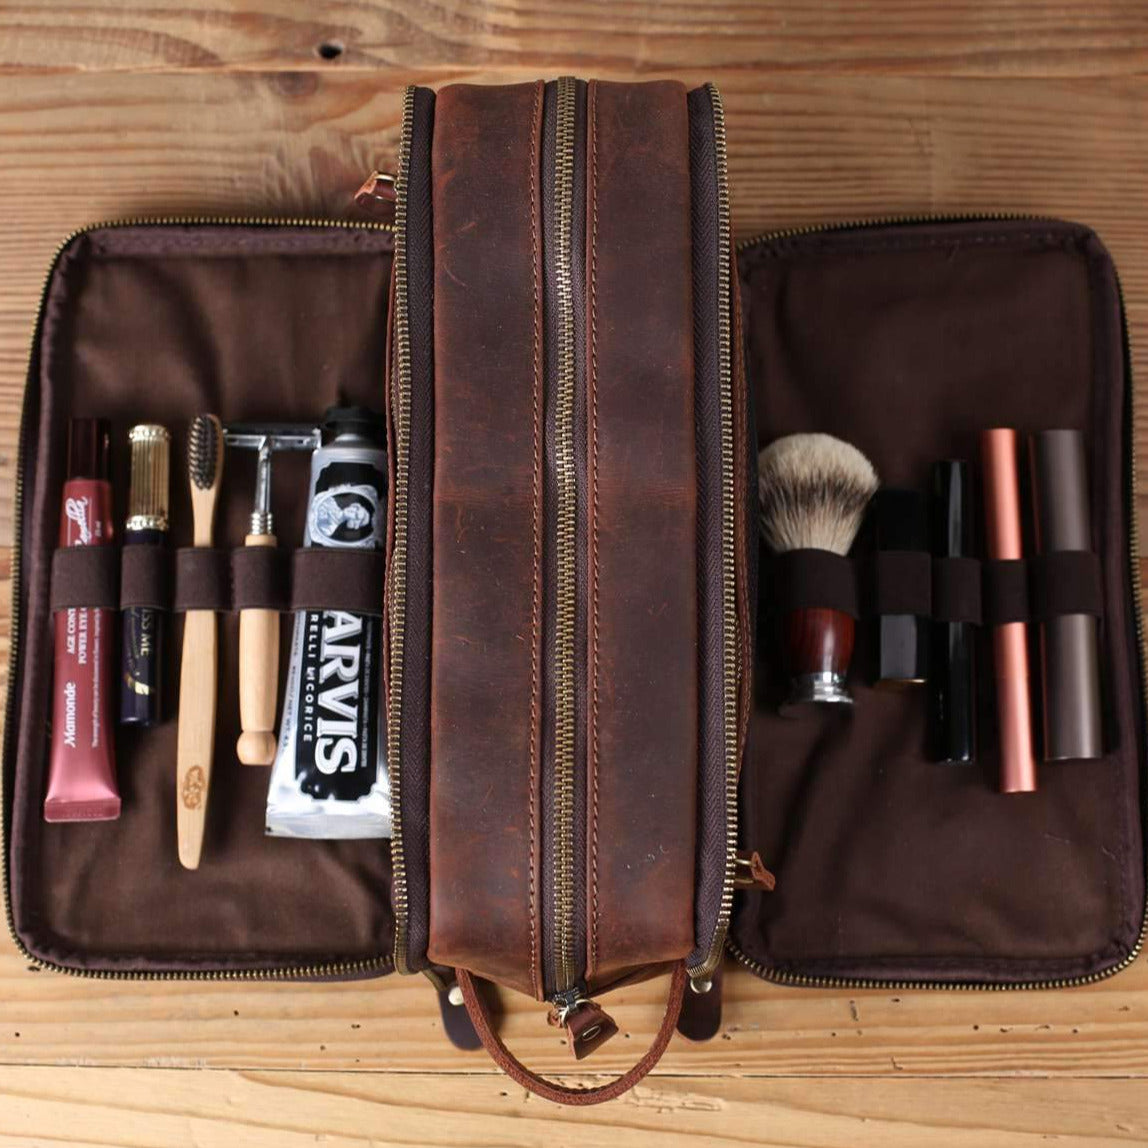 Men's Leather Framed Toiletry Bag - Water-Resistant Lined Dopp Kit, Standing Wide Mouth Design - Mahogany - Personalized Holiday Gifts, Leatherology